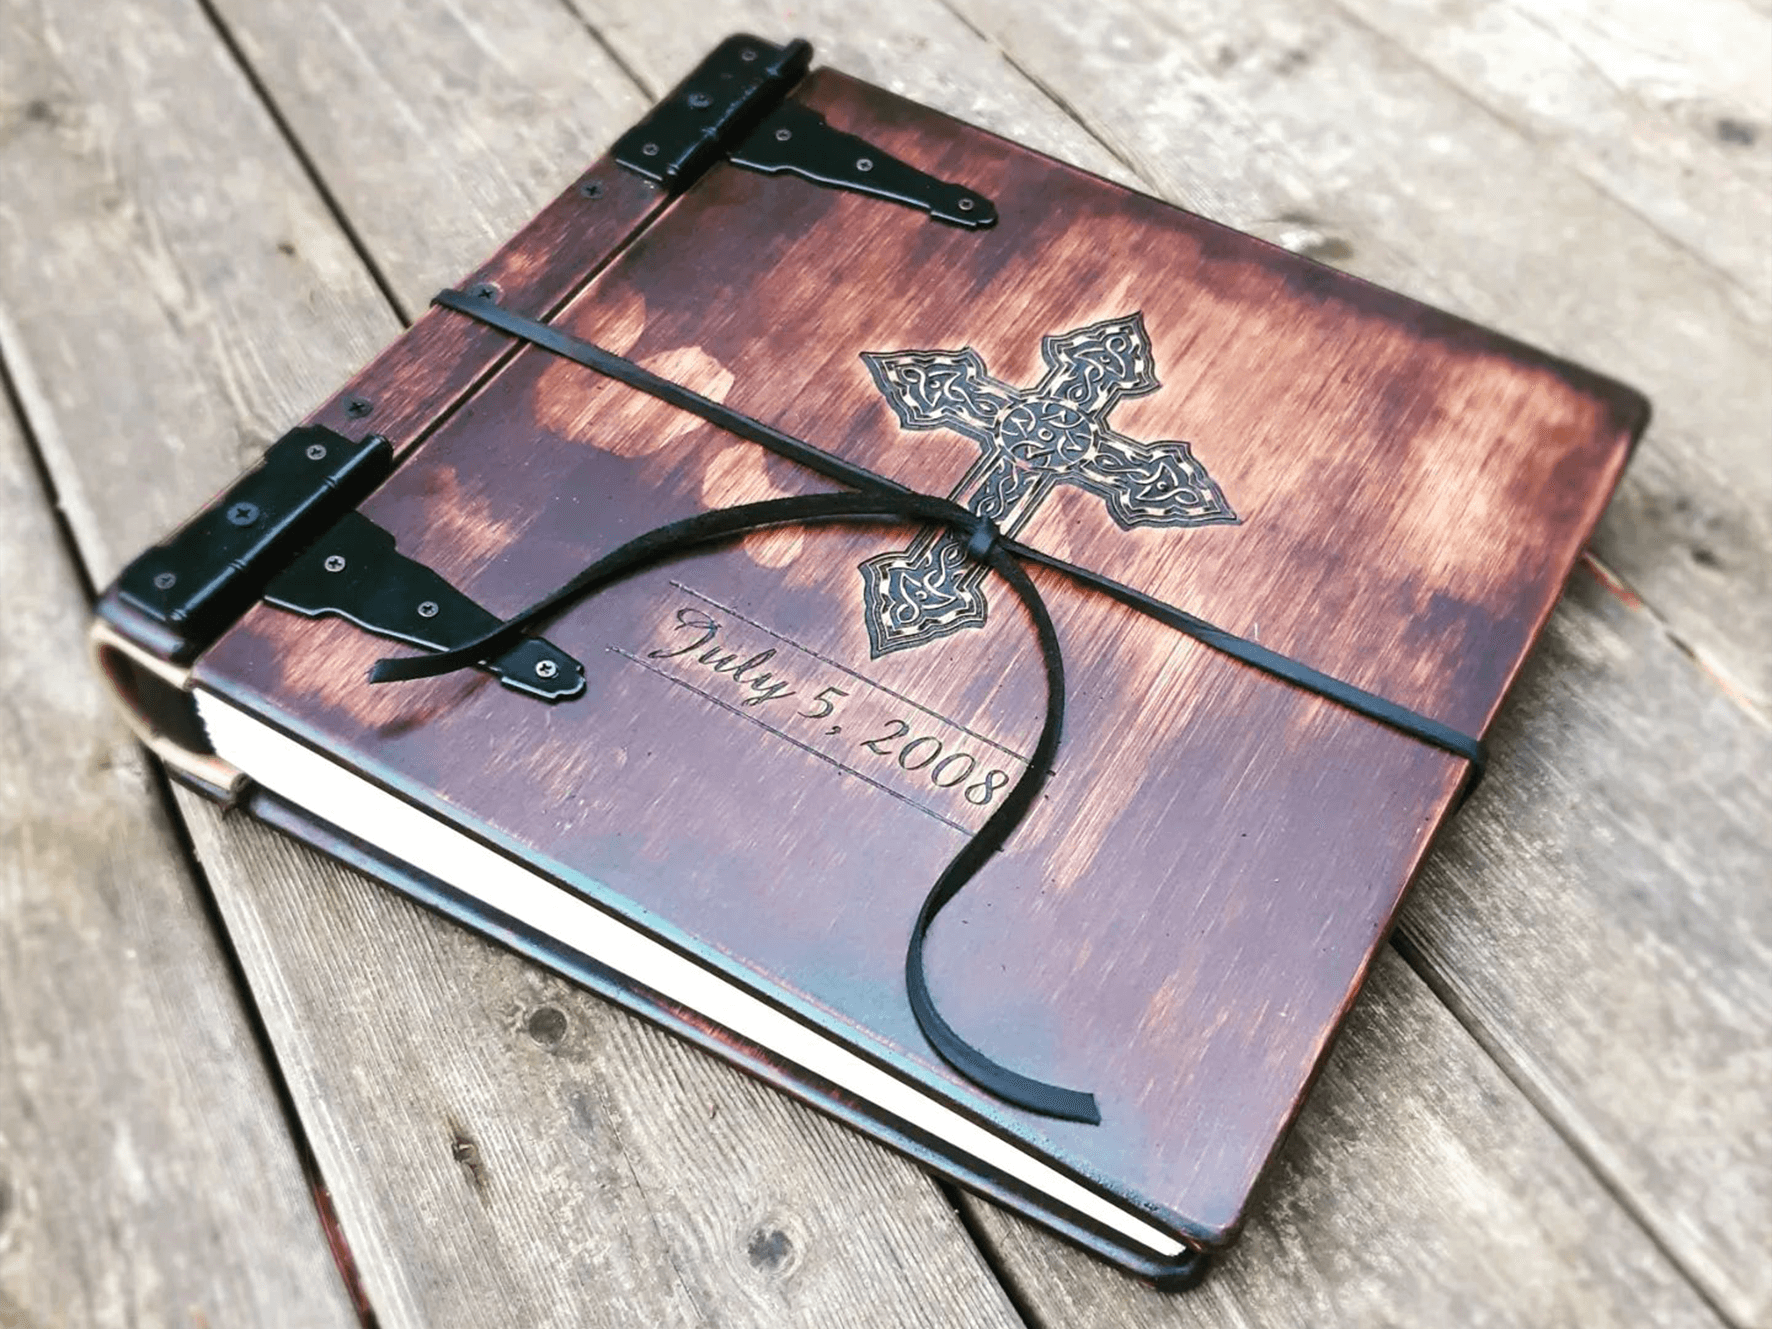 Personalized Prayer Journal | Connect with your spirituality with a personalized prayer journal by Rustic Engravings - a beautiful and meaningful gift for anyone on their faith journey.